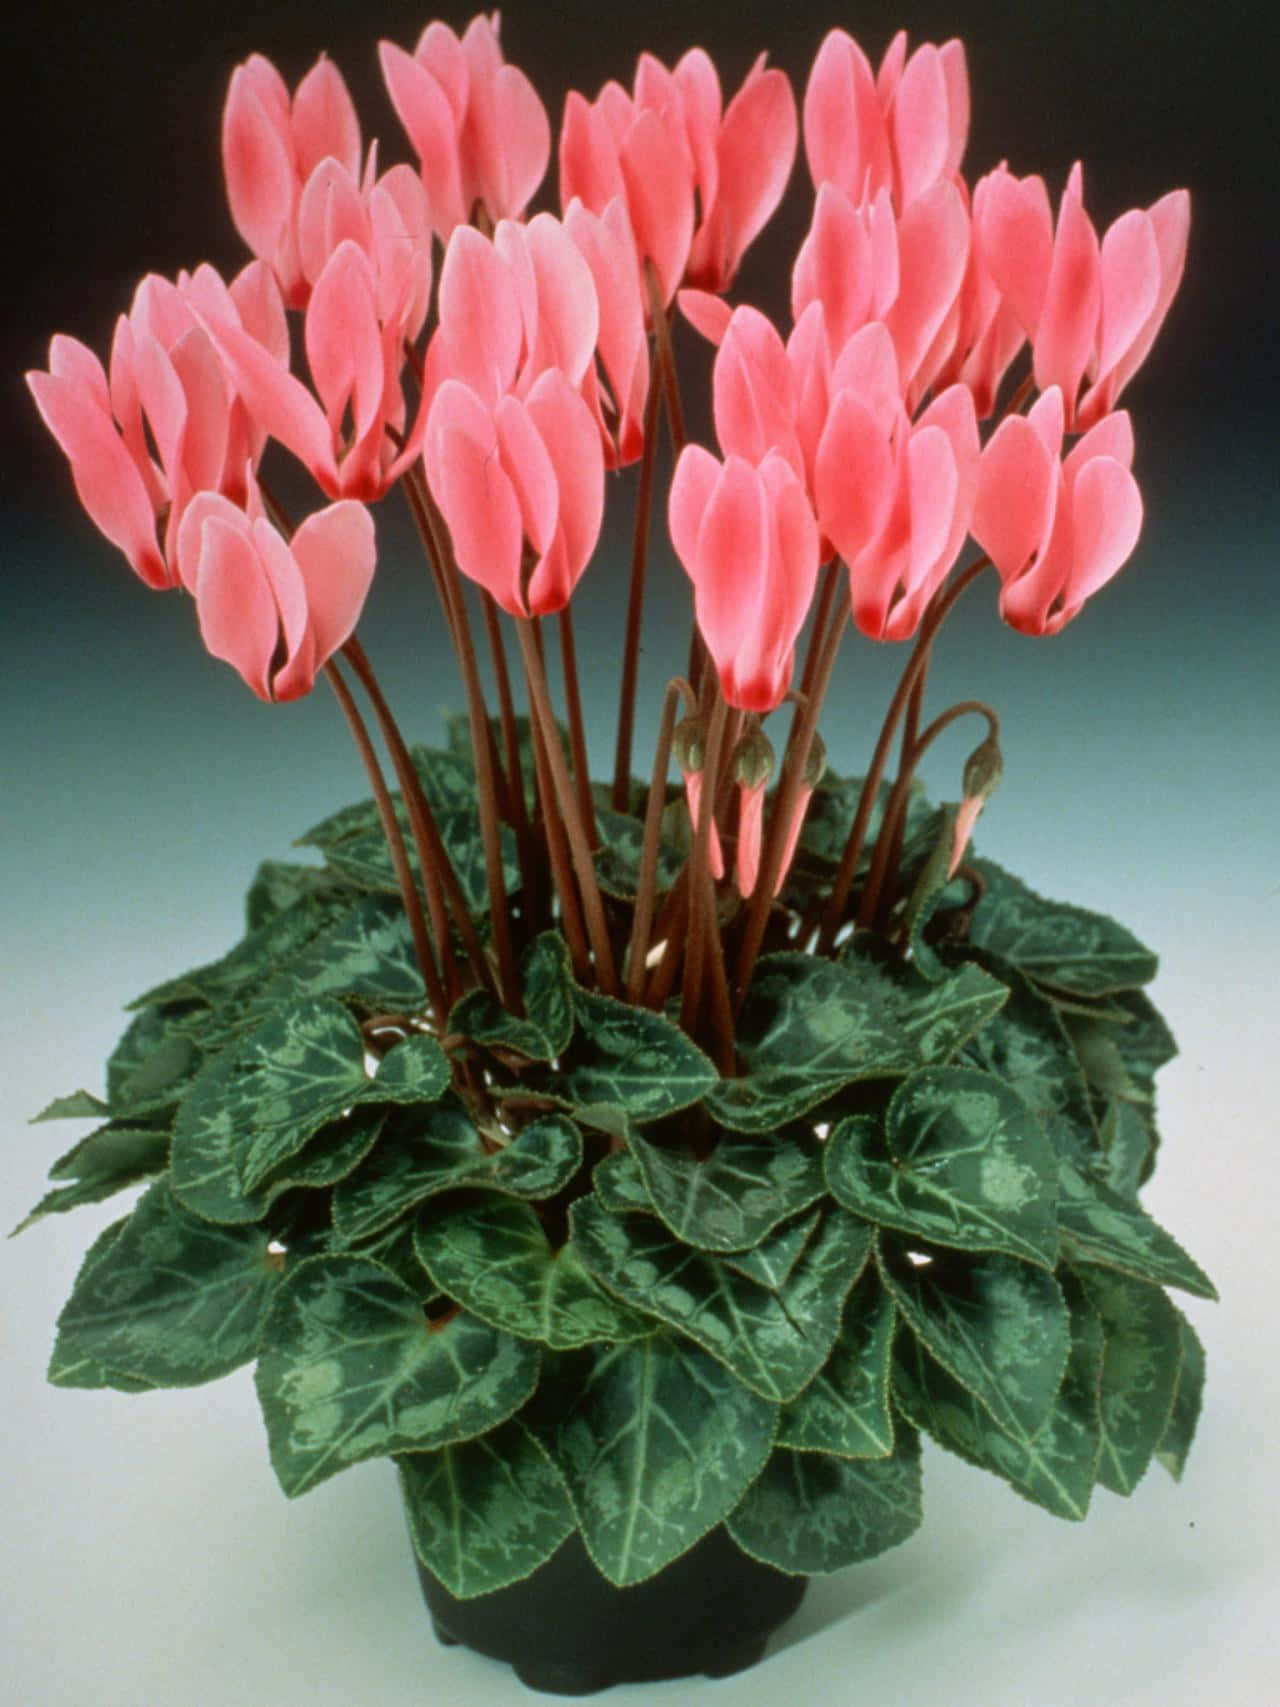 Experience an array of cheerful and delicate Cyclamen blossoms